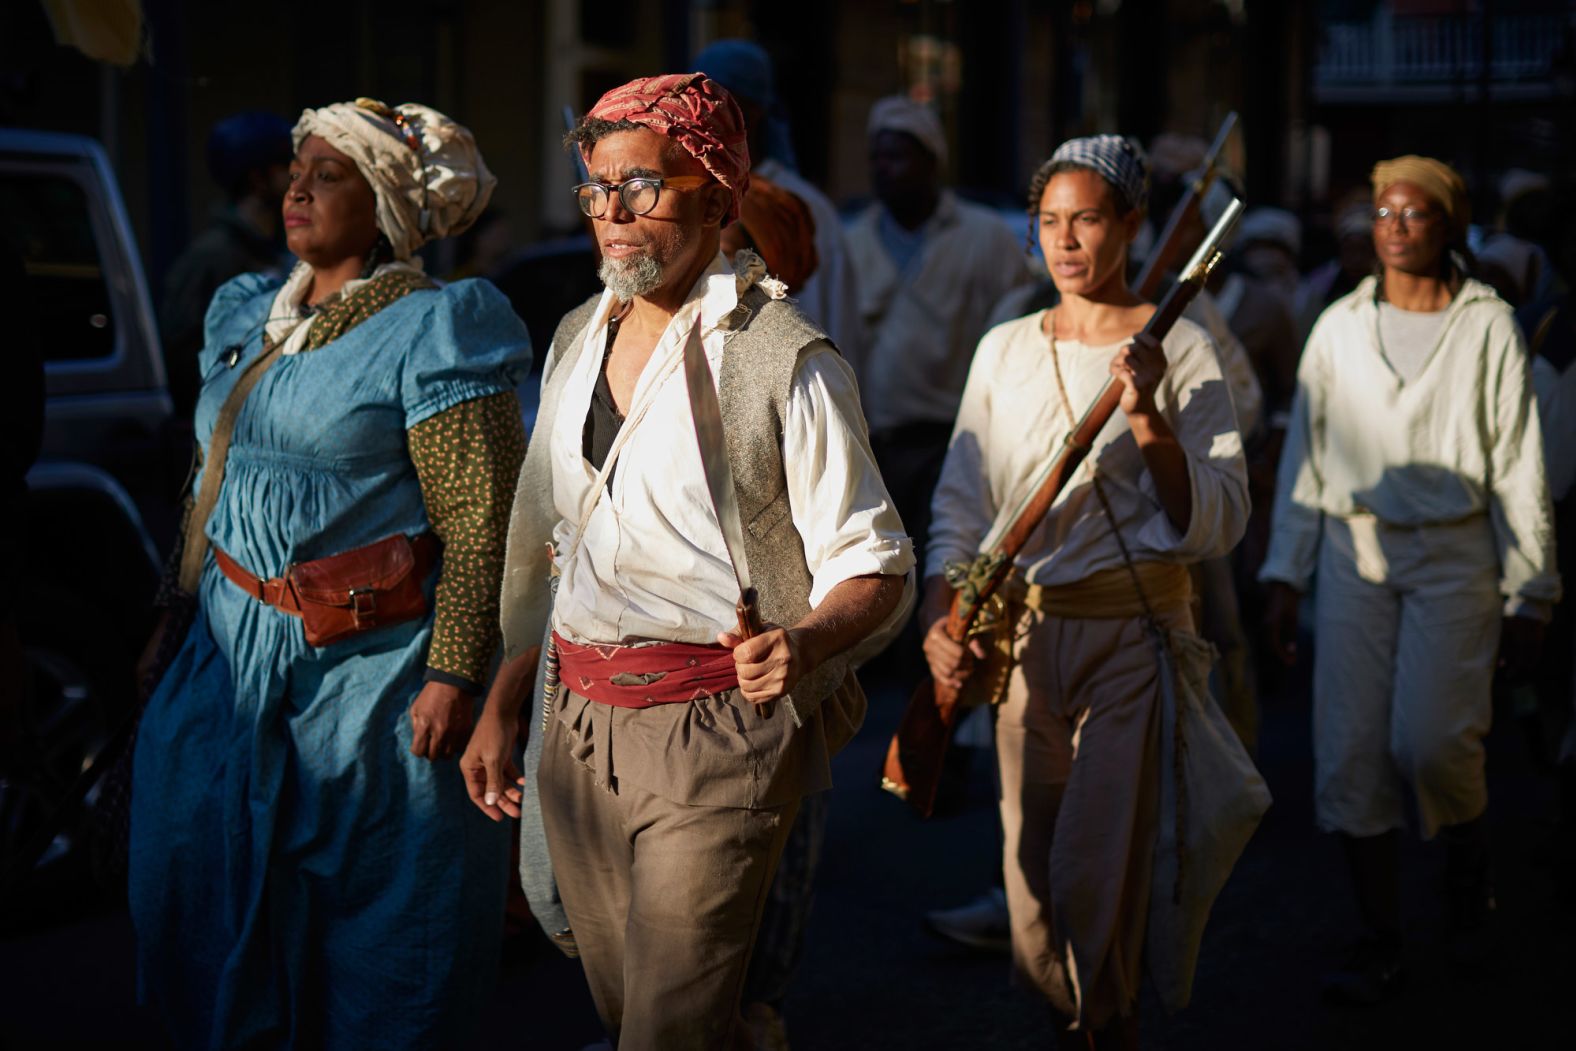 Artist Dread Scott, second from left, marches through New Orleans. Scott spent six years planning the march in conjunction with other artists, historians and community members.